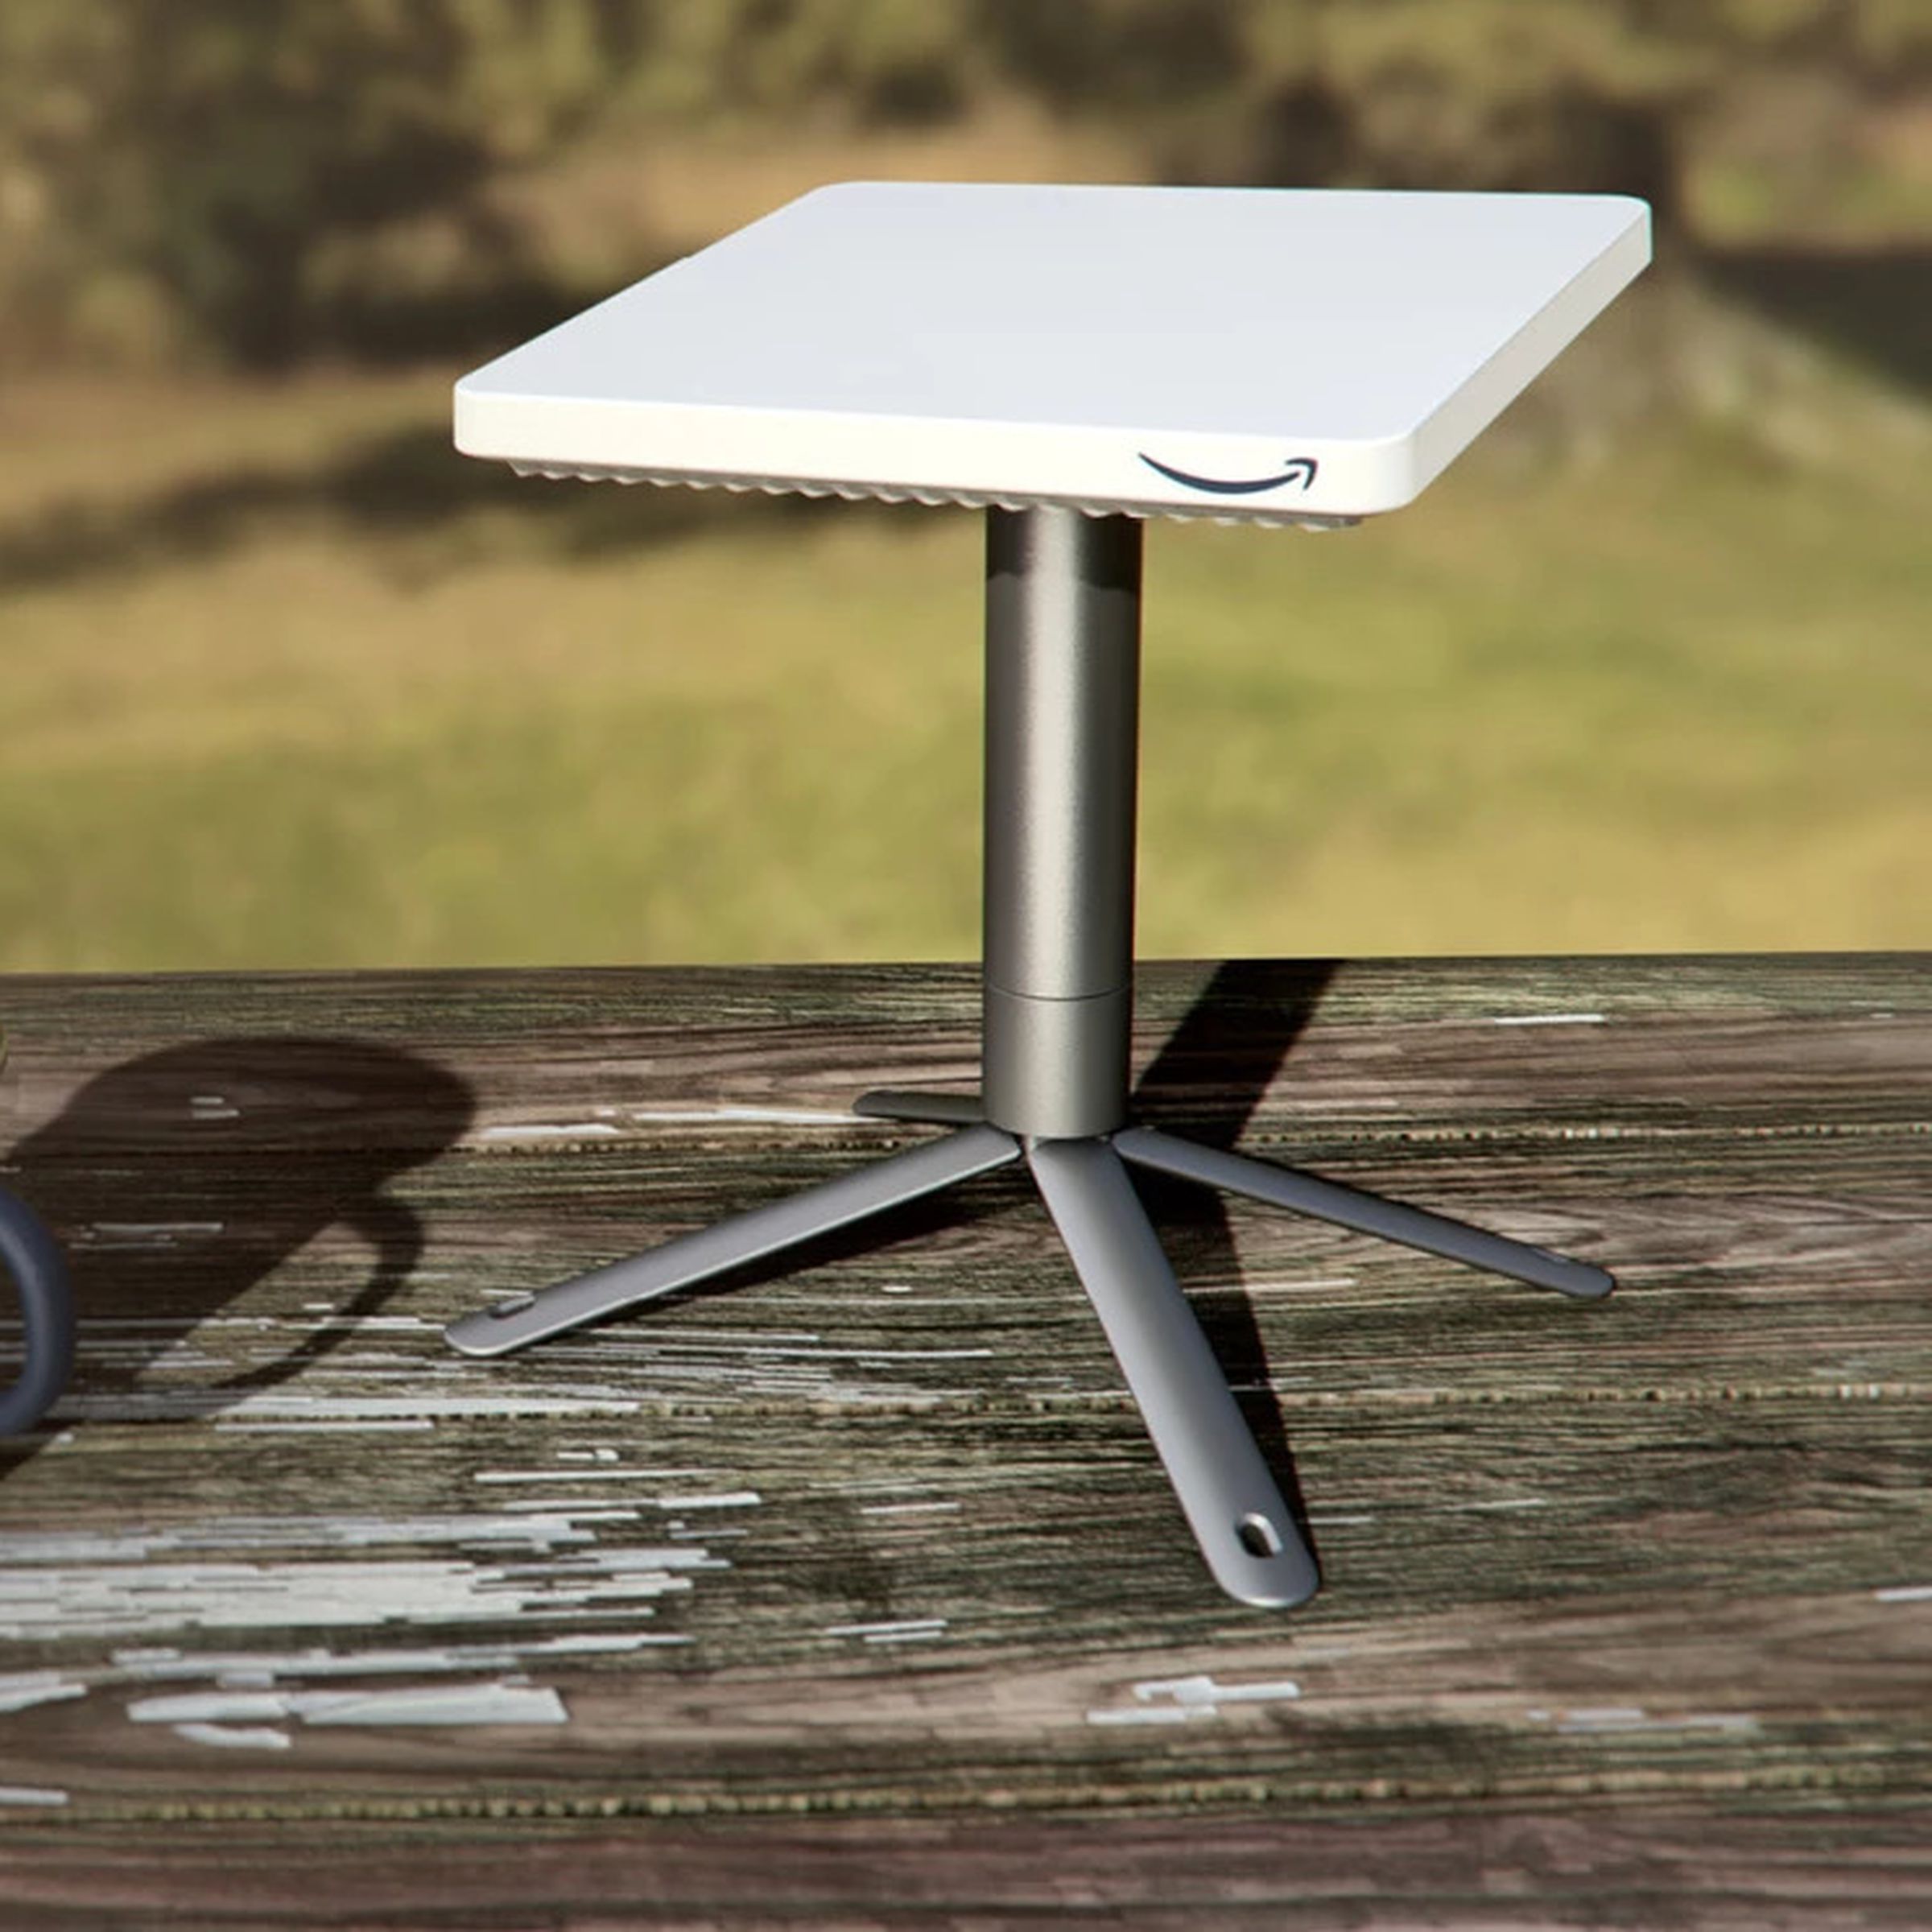 An image showing Amazon’s compact Project Kuiper satellite dish on a table